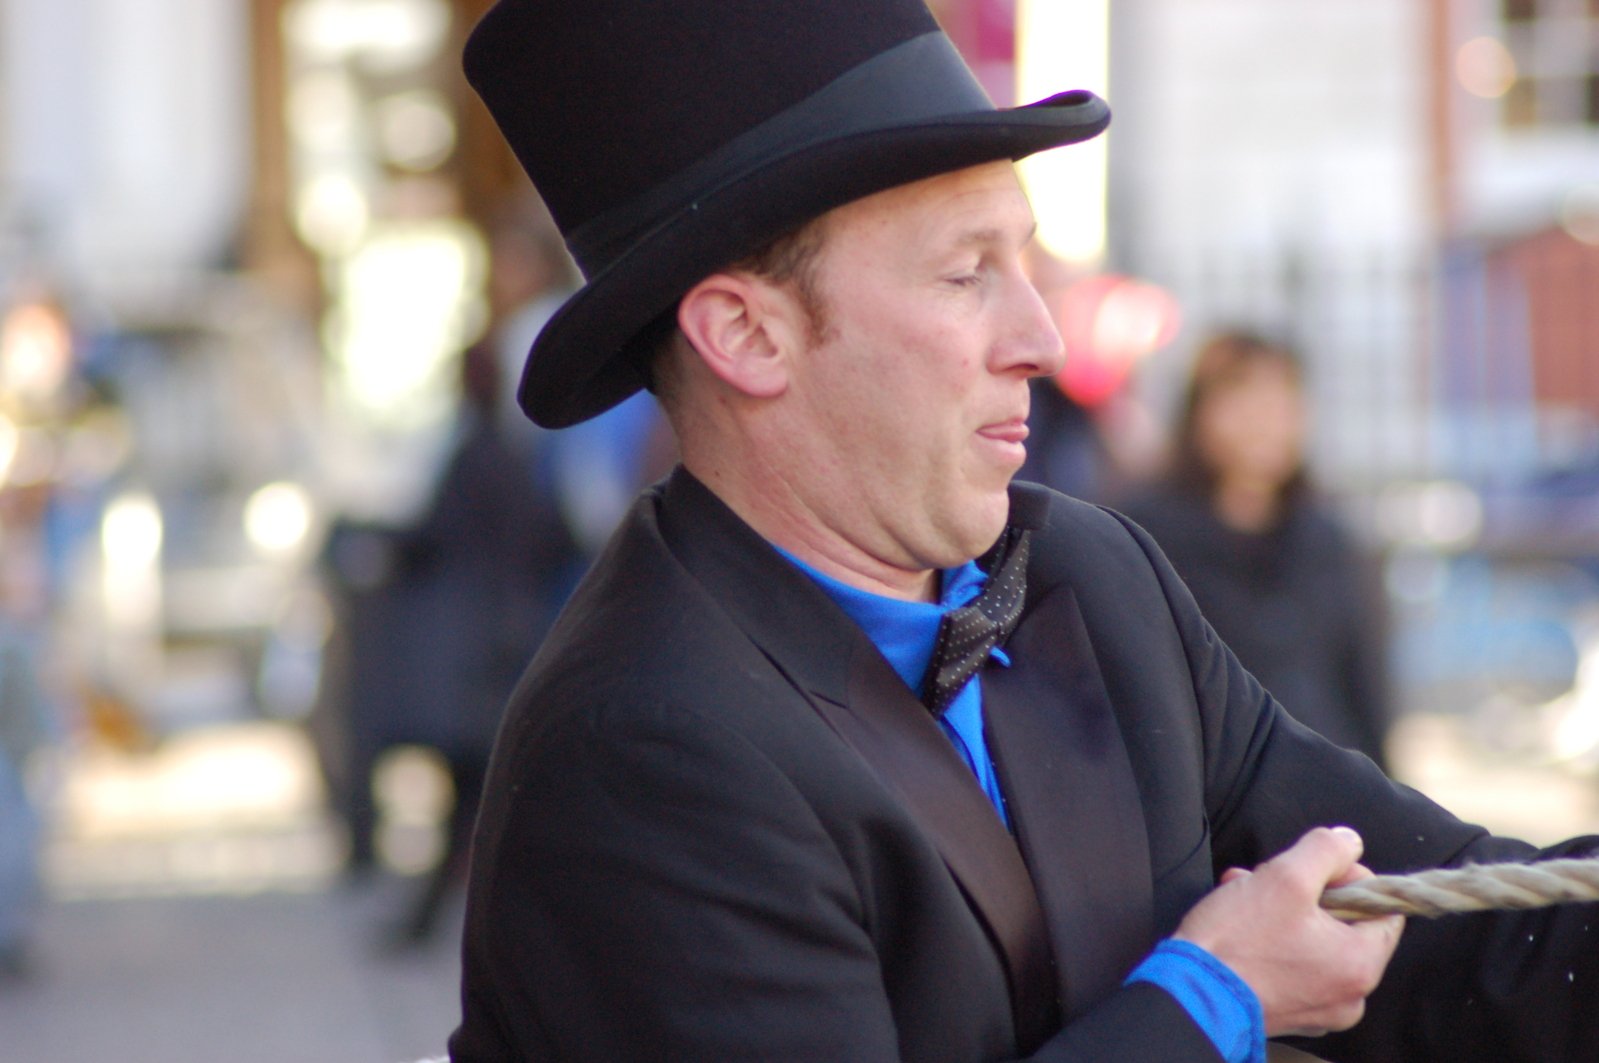 man wearing a top hat holds his cane in his right hand